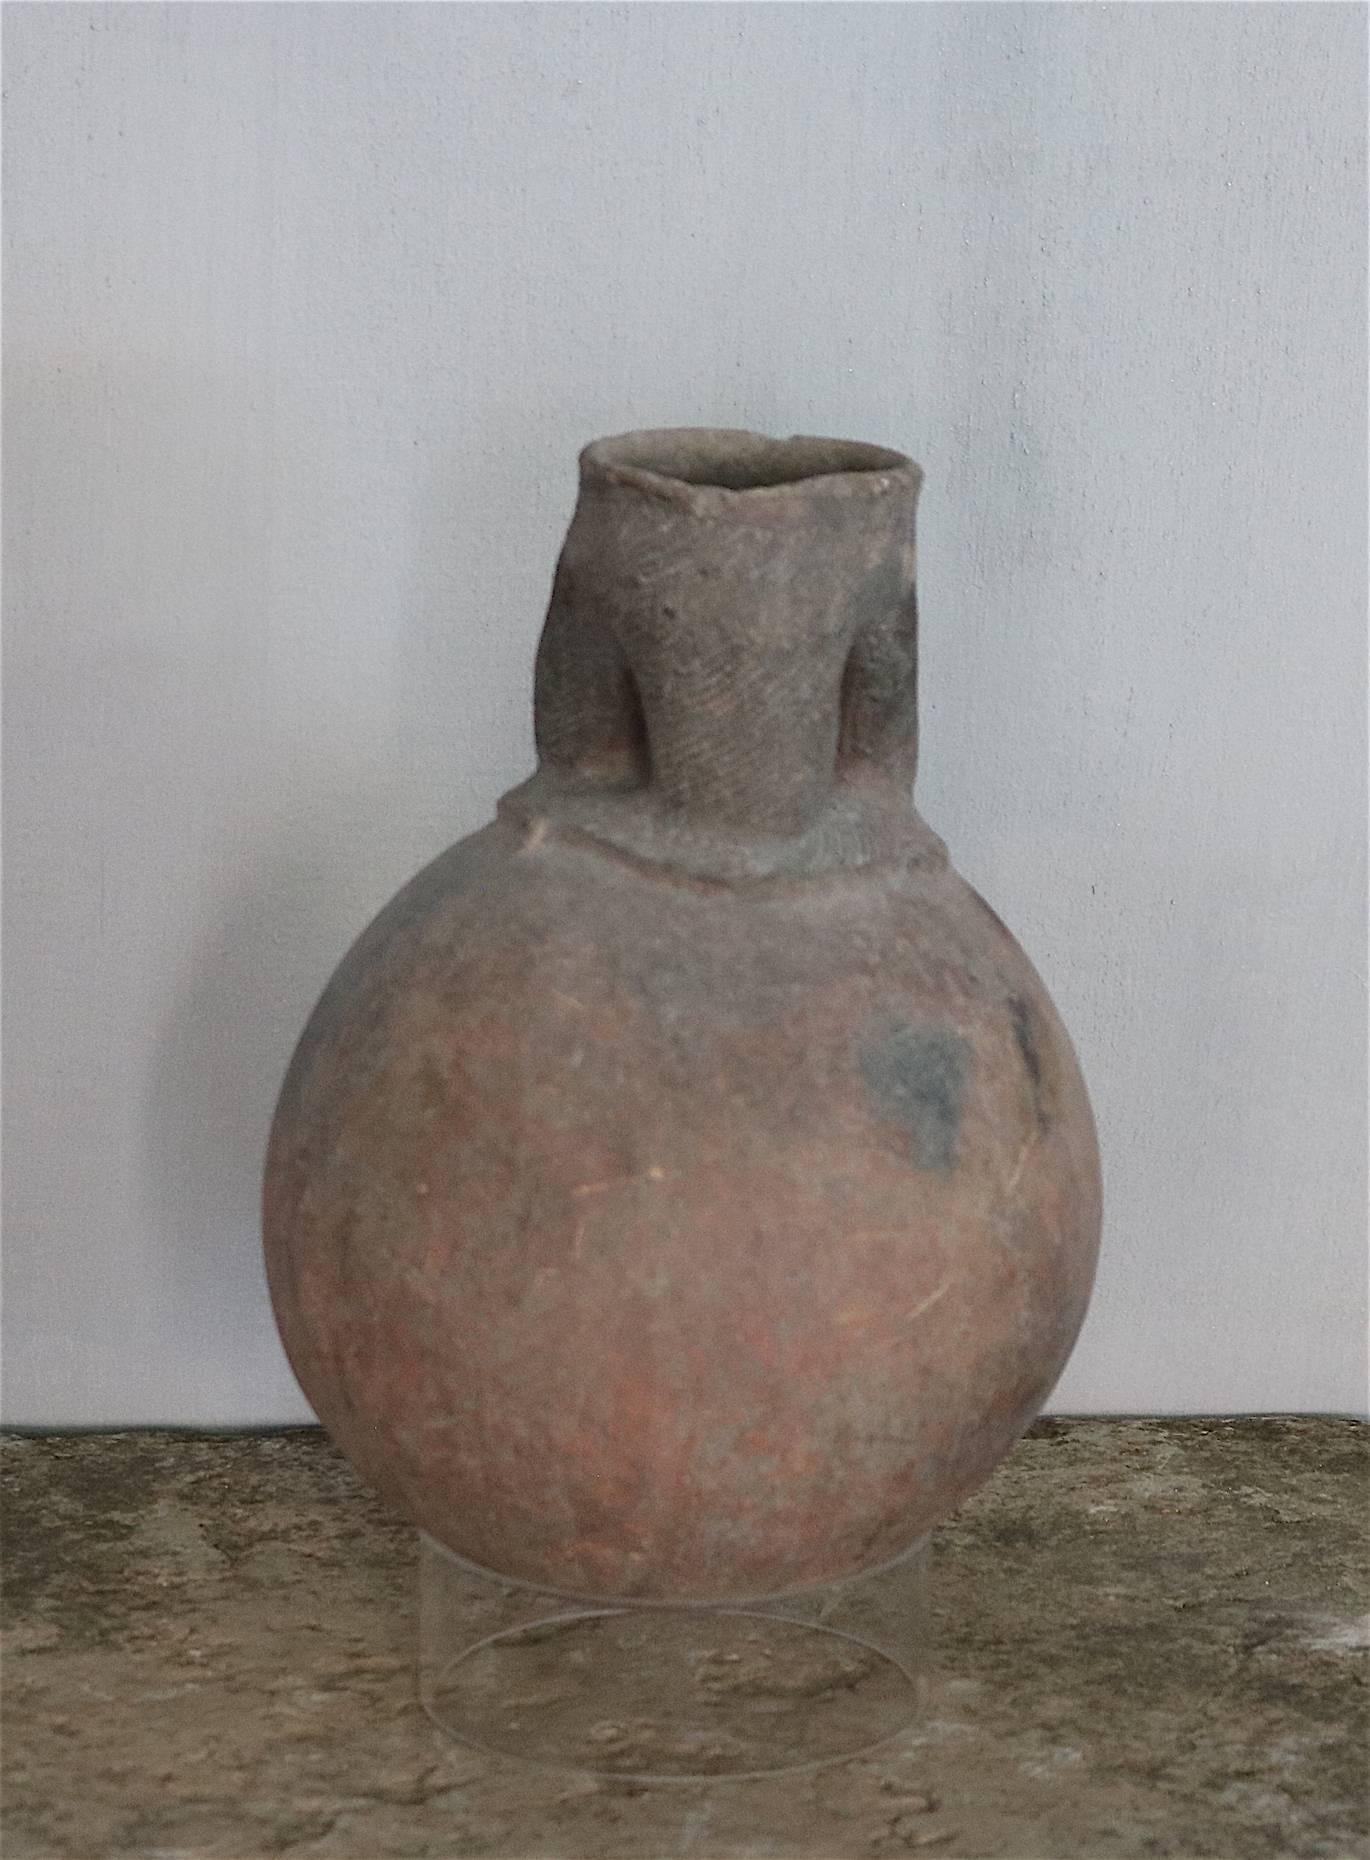 Lovely old clay pot from Nigeria originally used for sacrifices. The pot originates from a private French collection.